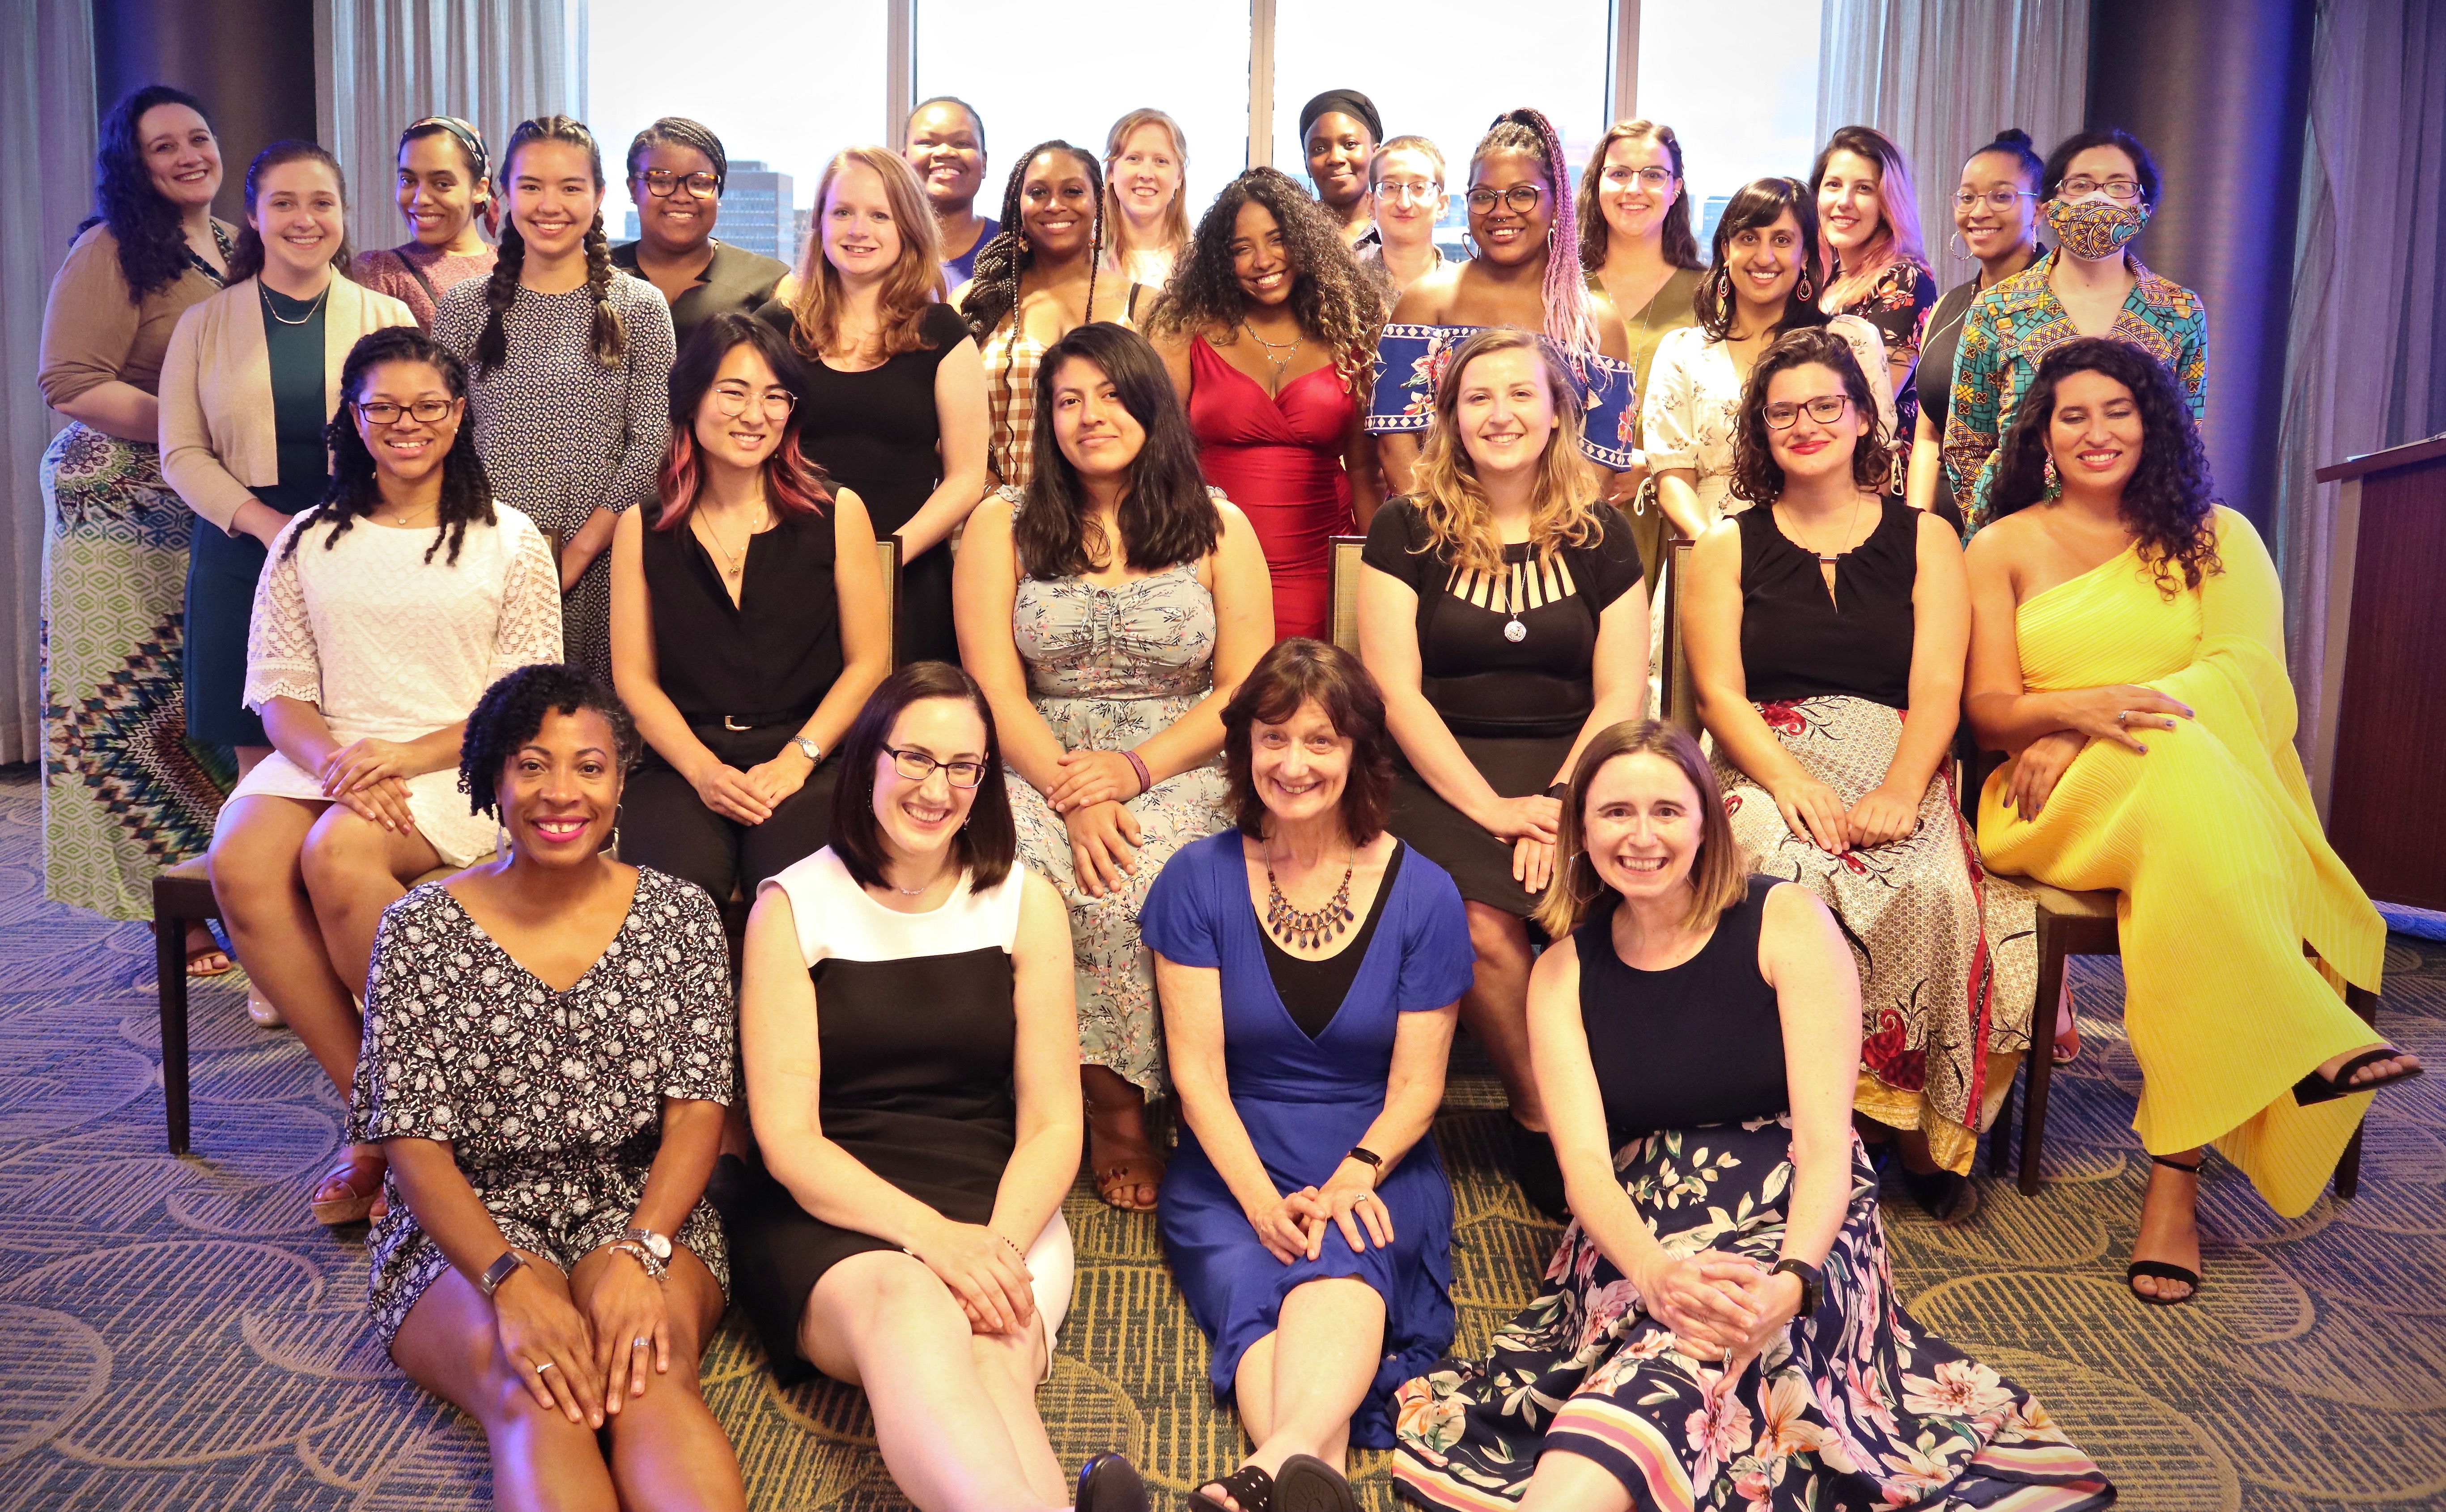 During the summer of 2021, I participated in
        the Enhancing Diversity in Graduate Education (EDGE) program for women entering PhD programs in Math. Through this opportunity, 
        I met some of the most influential people in my life. 